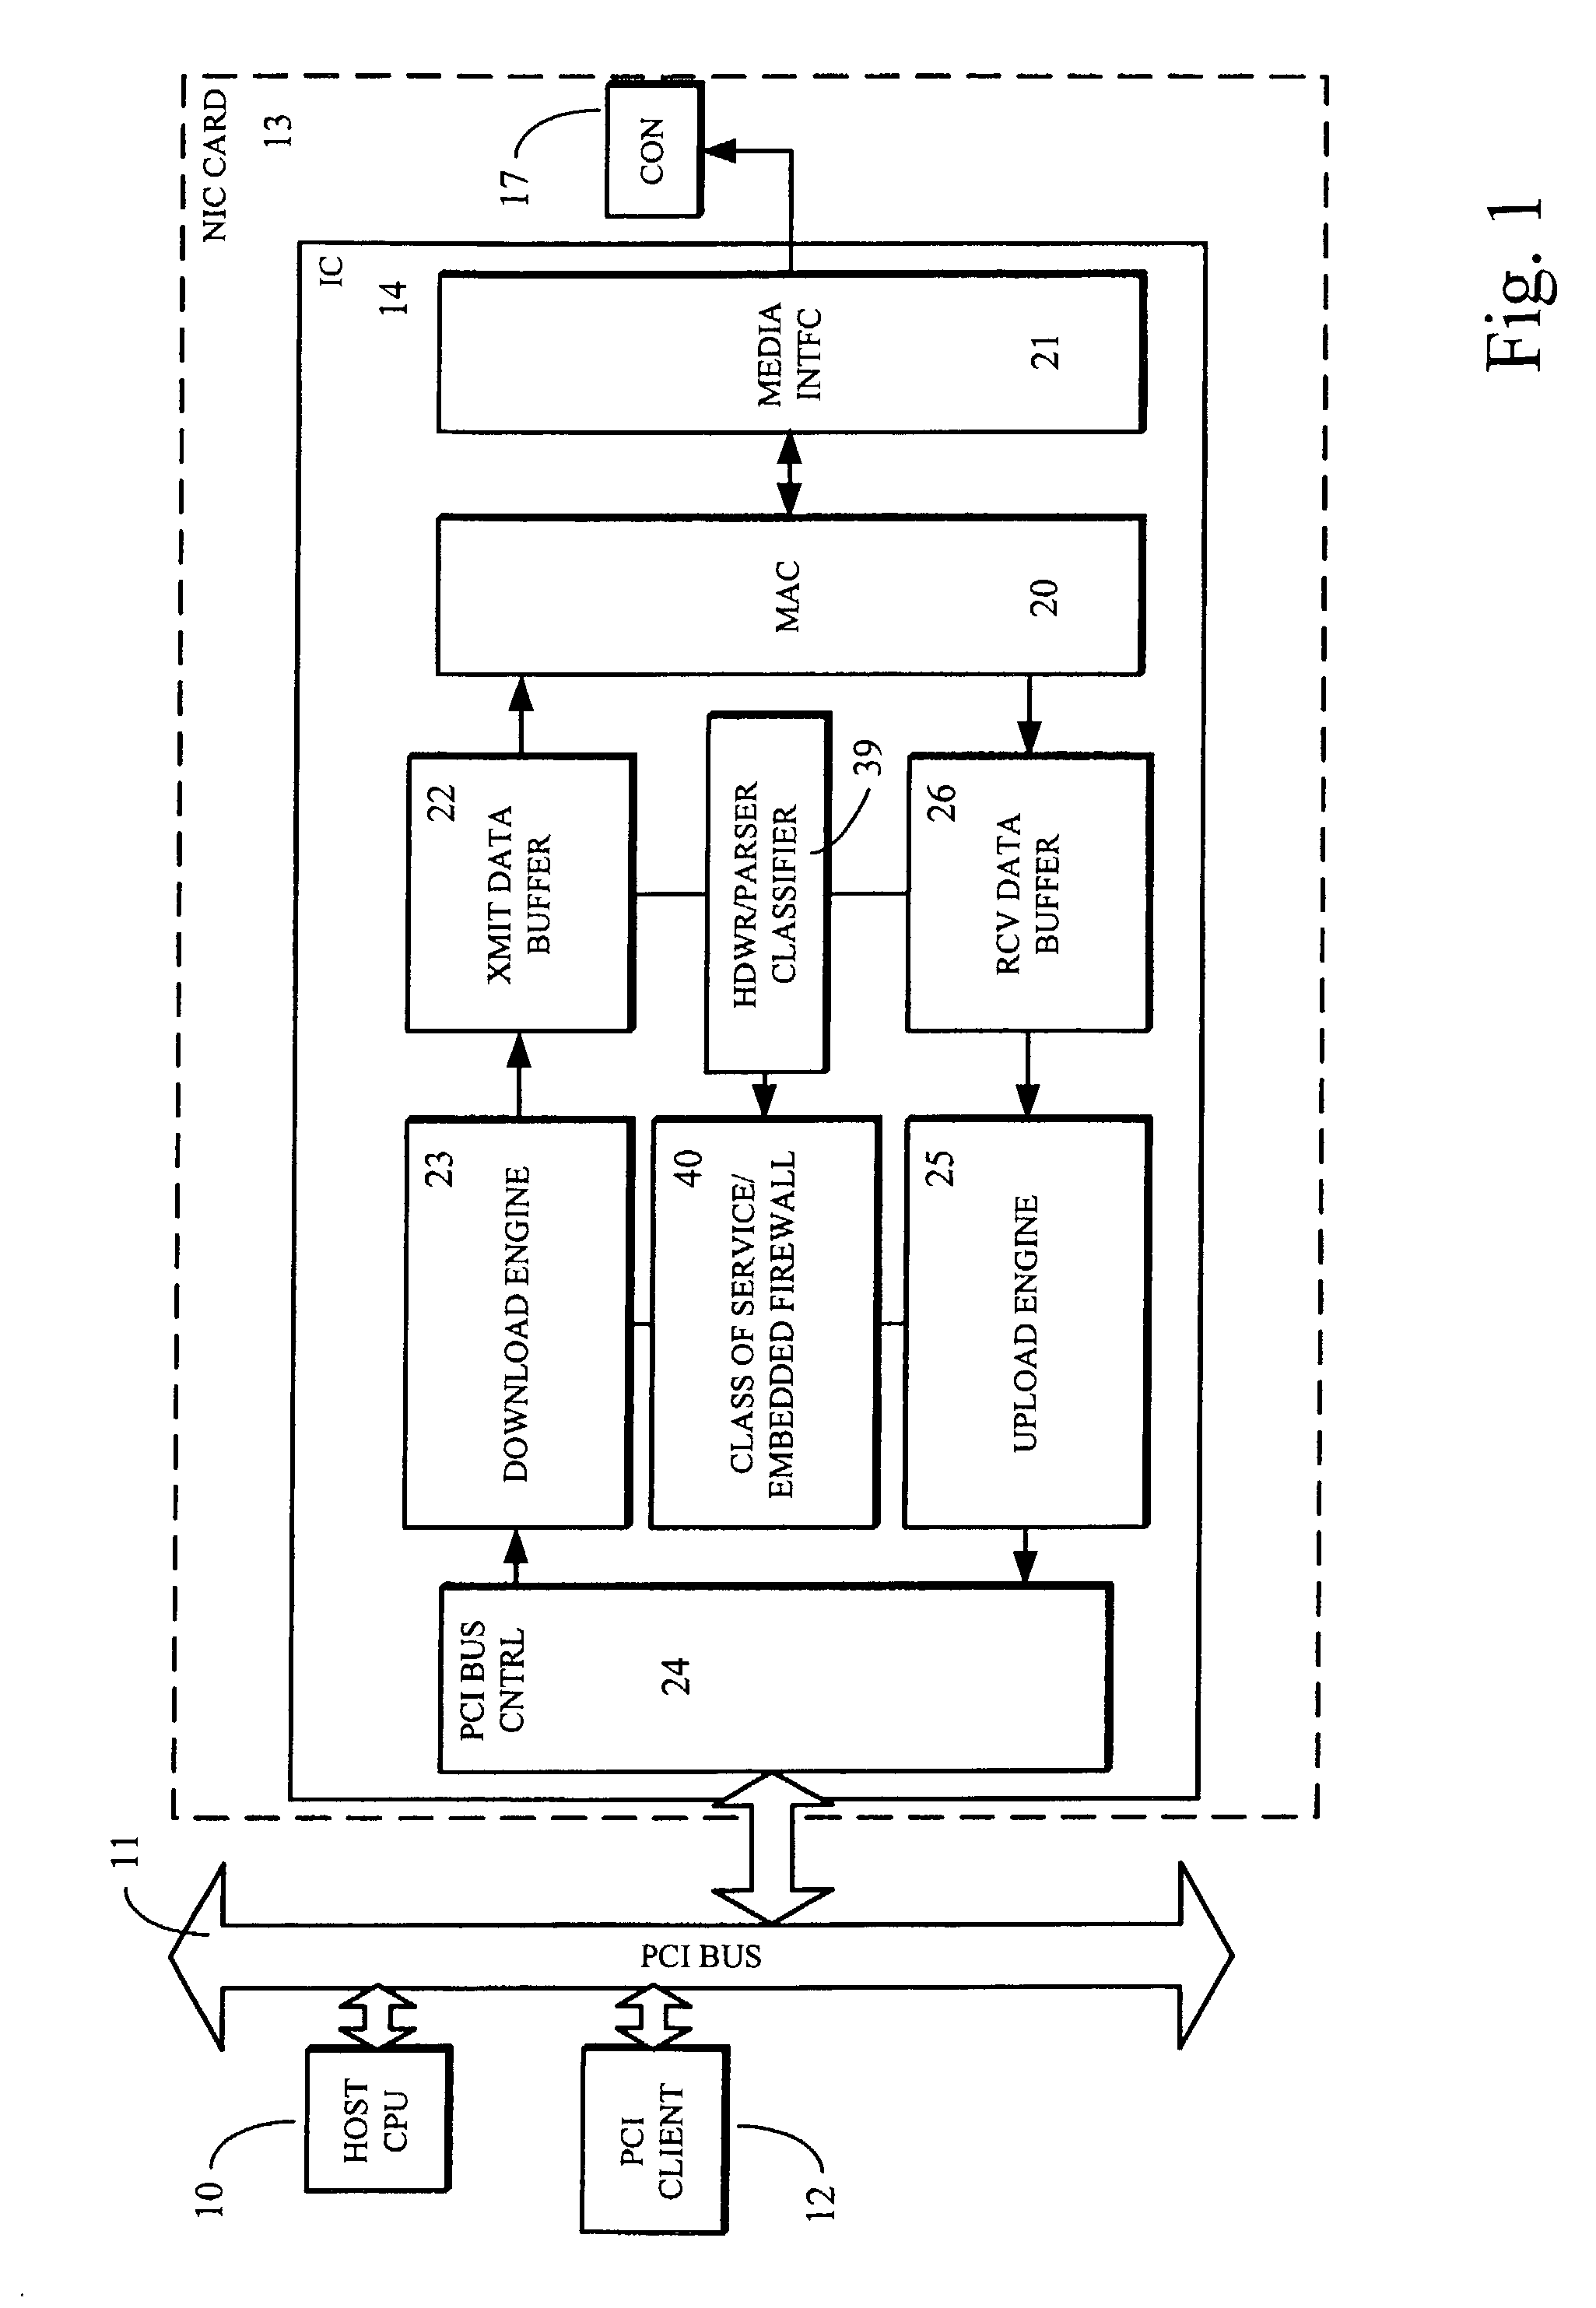 Computer system and network interface supporting class of service queues